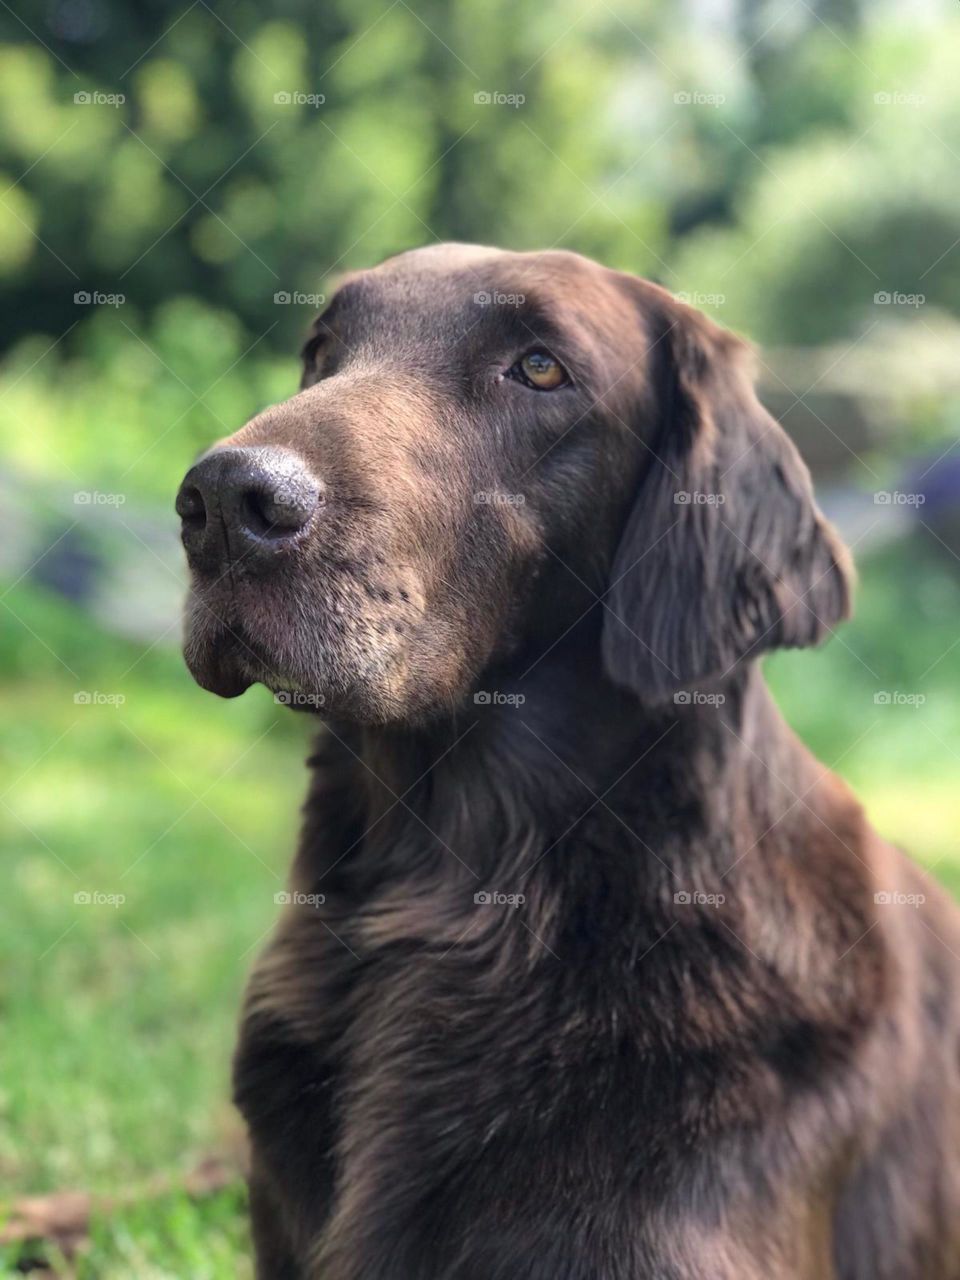 This flatcoat retriever oozes beauty and talent in front of the camera.  The background is a lovely blur of greenery that draws the dog to the viewer.